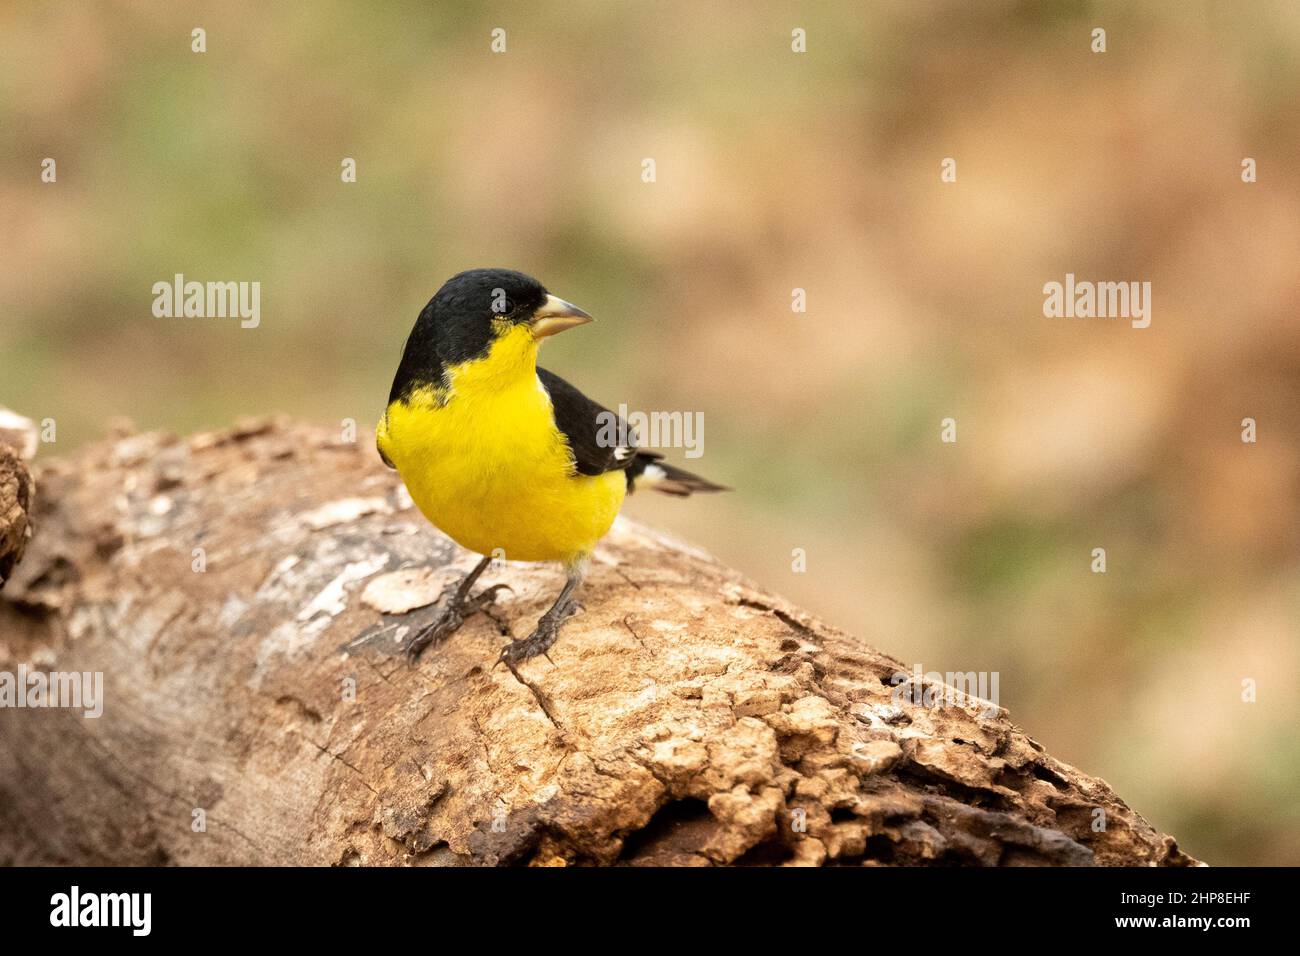 Lesser Goldfinch Carlduelis psaltria resting on log. Here shown in central Texas at eastern edge of its US range. Stock Photo